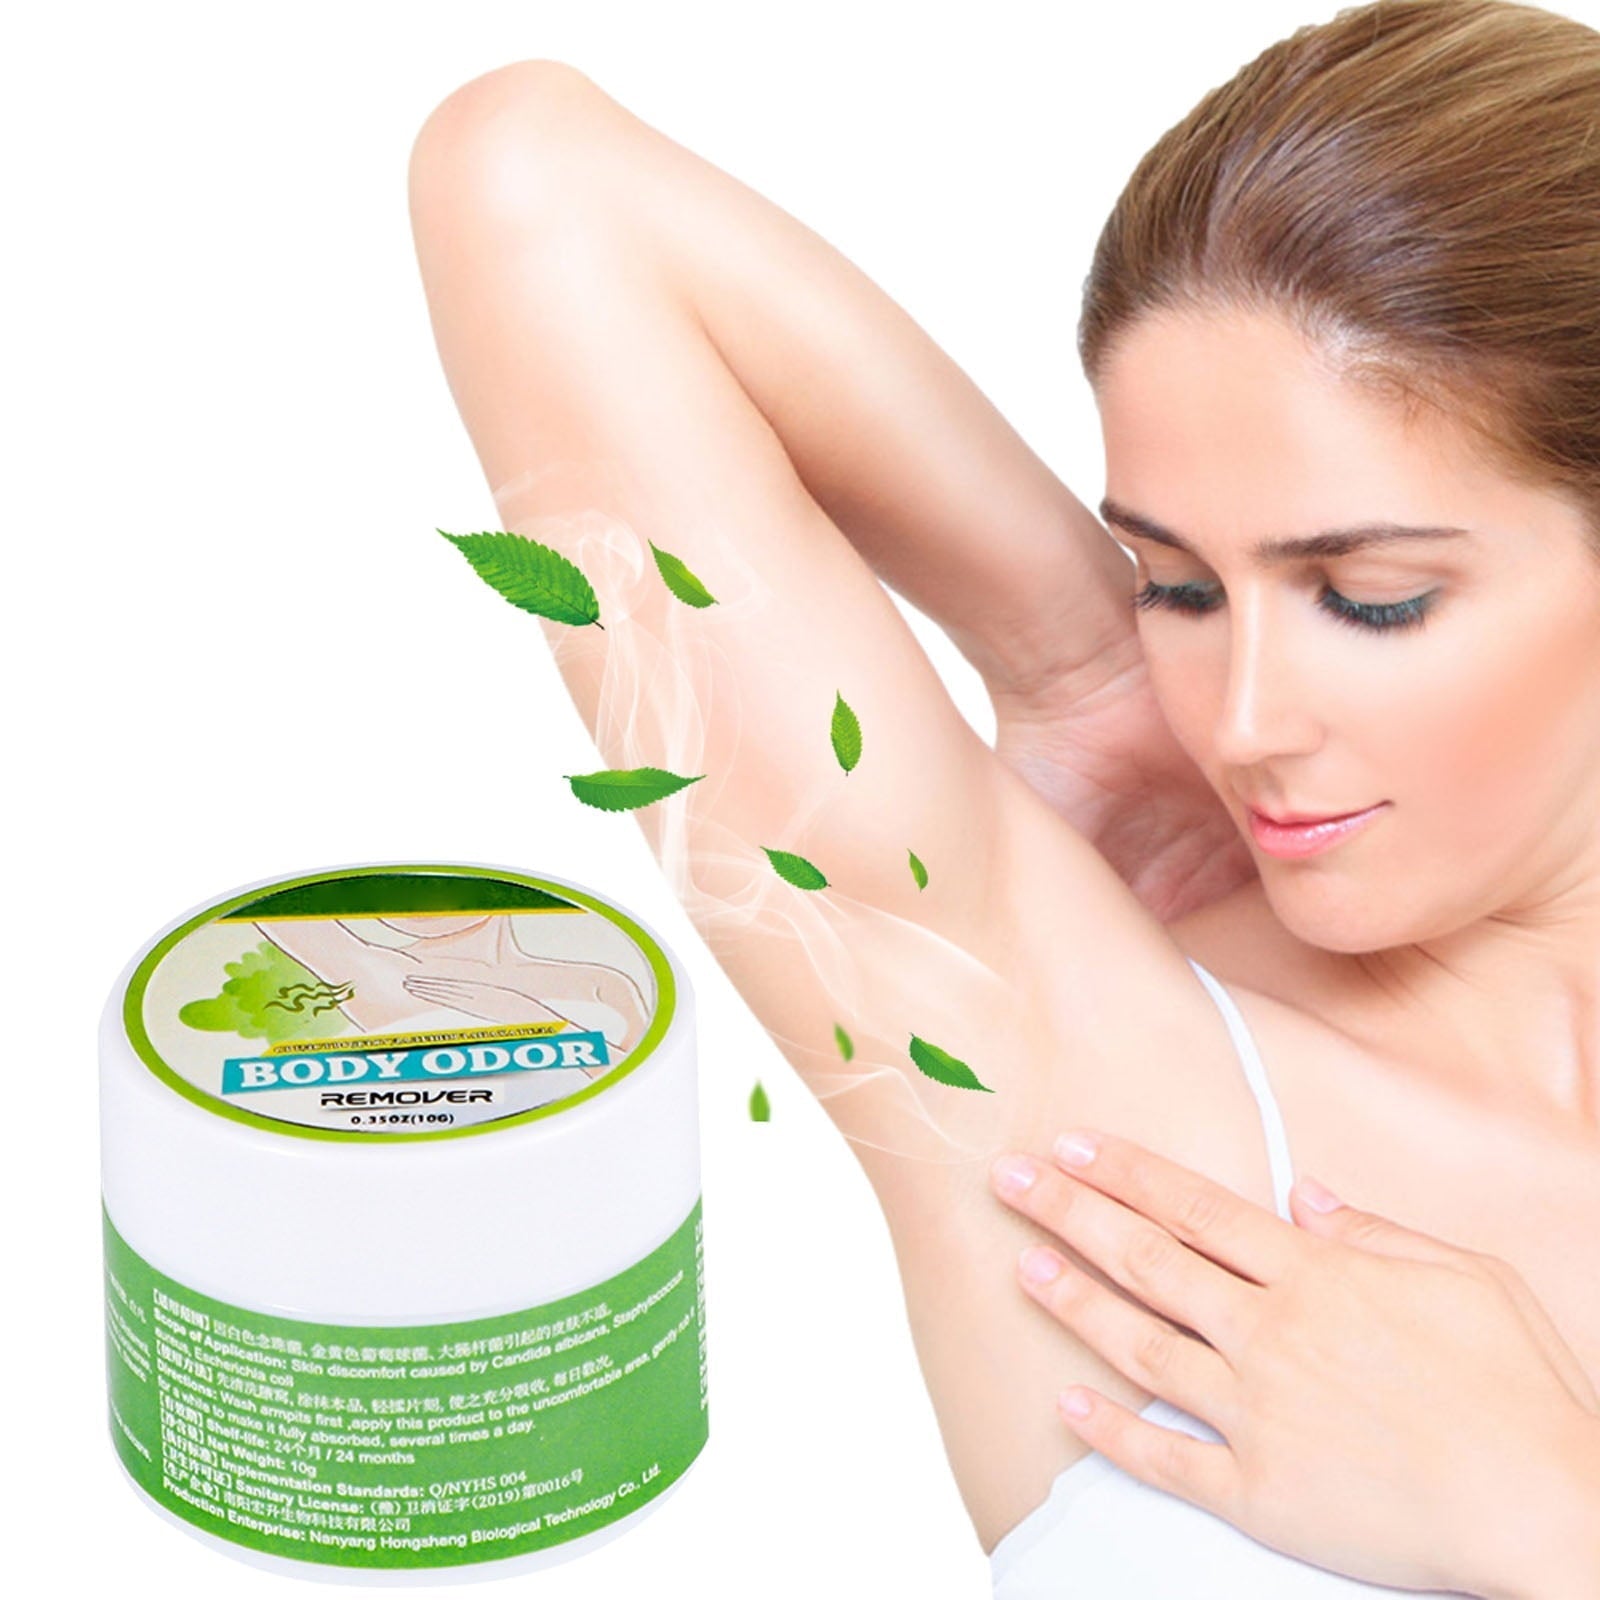 Wholesale prices with free shipping all over United States Pjtewawe Personal Skin Care Armpit Odor To Body Odor Skin Topical For Men To Use For Girls To Use To Odor Daily Use Sweat And Odor Control - Steven Deals